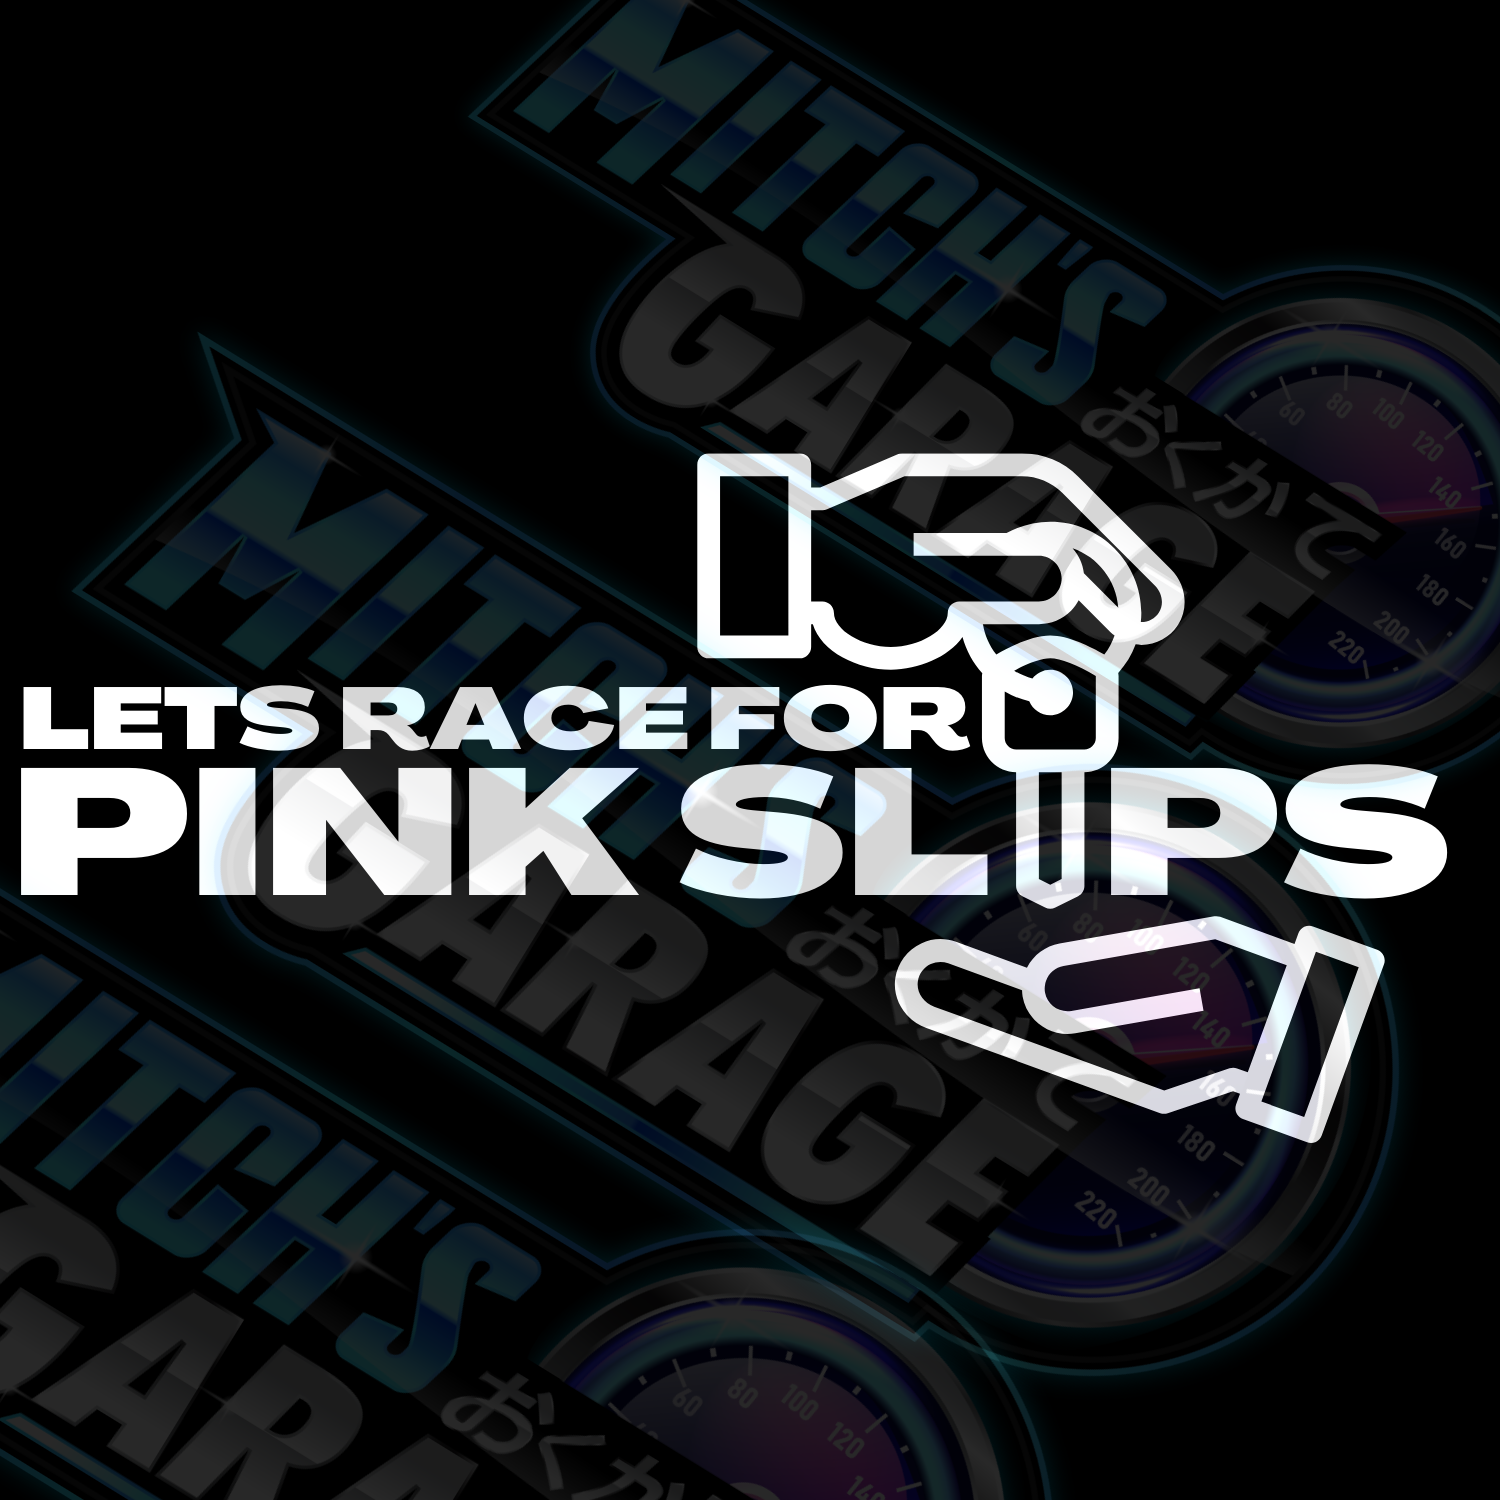 Lets RACE for PINK SLIPS Vinyl Decal